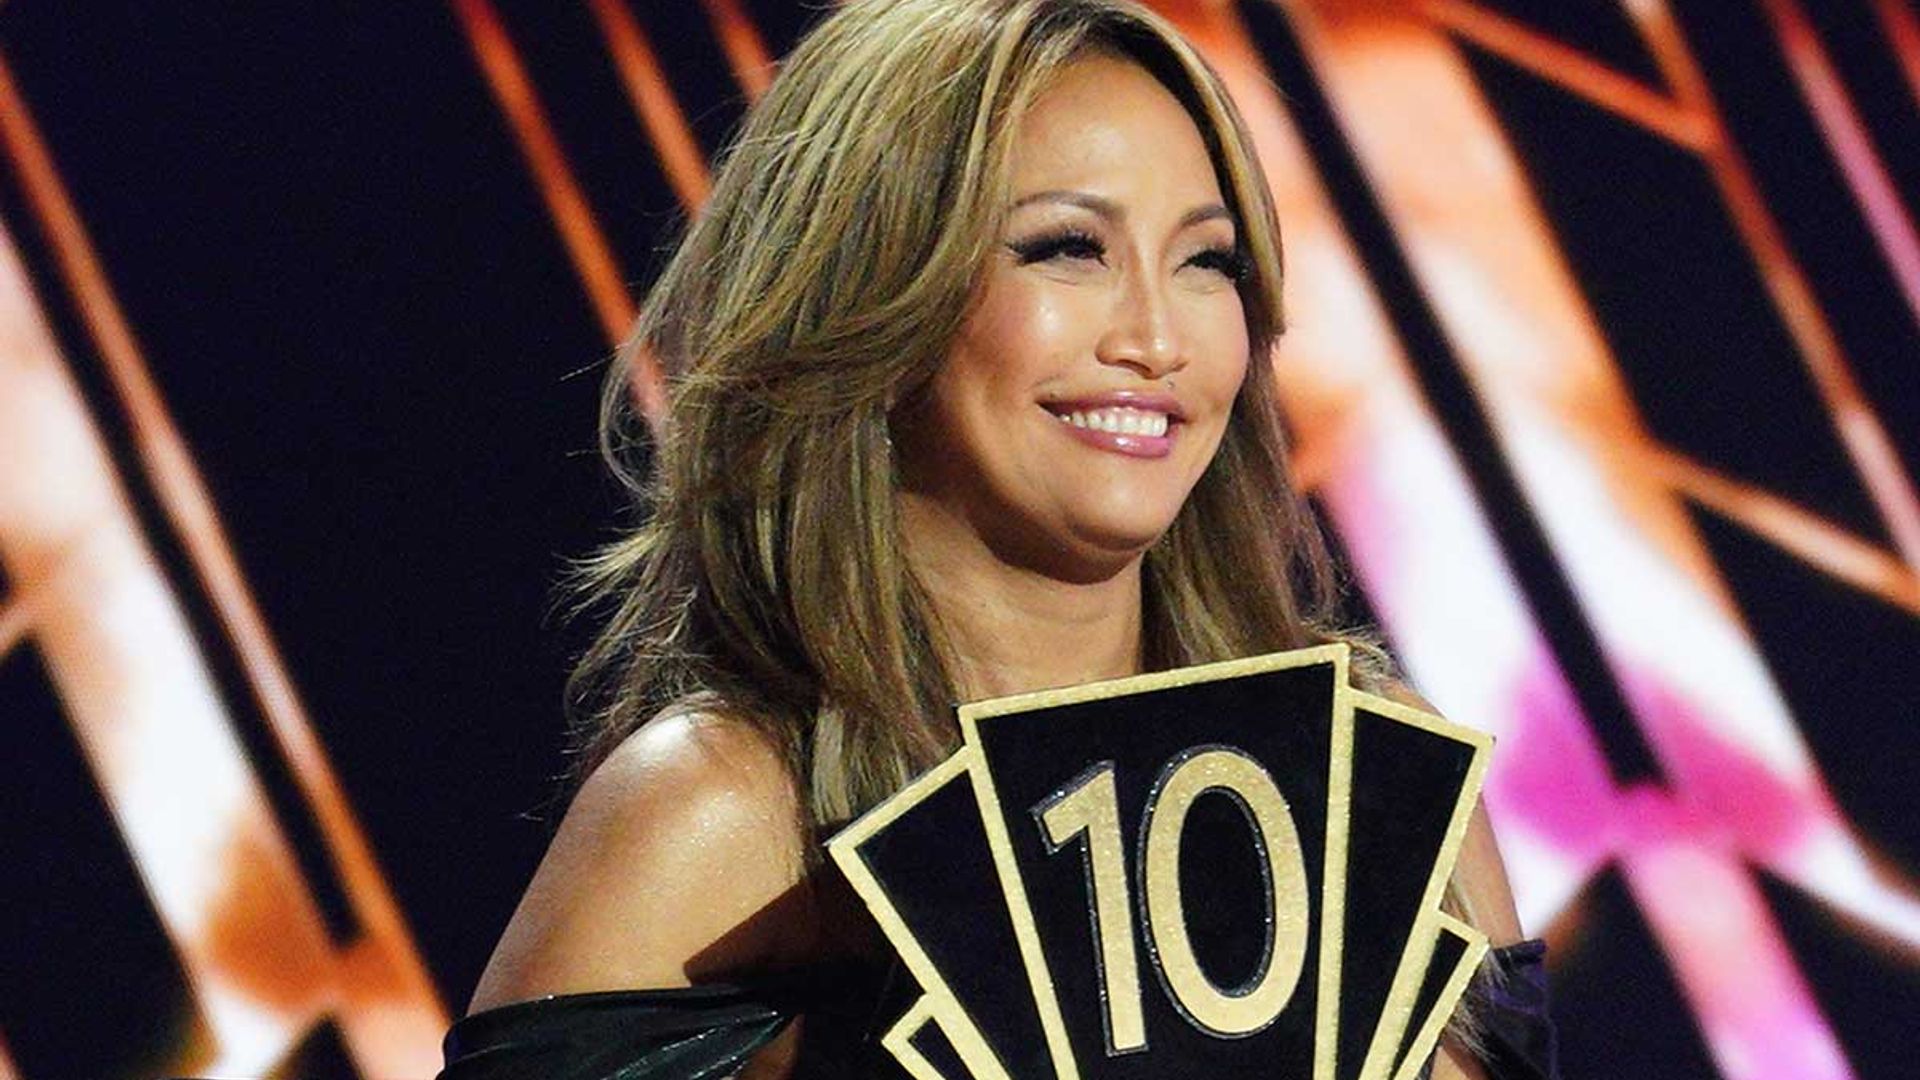 DWTS' Carrie Ann Inaba looks unreal in jaw-dropping low-cut gown